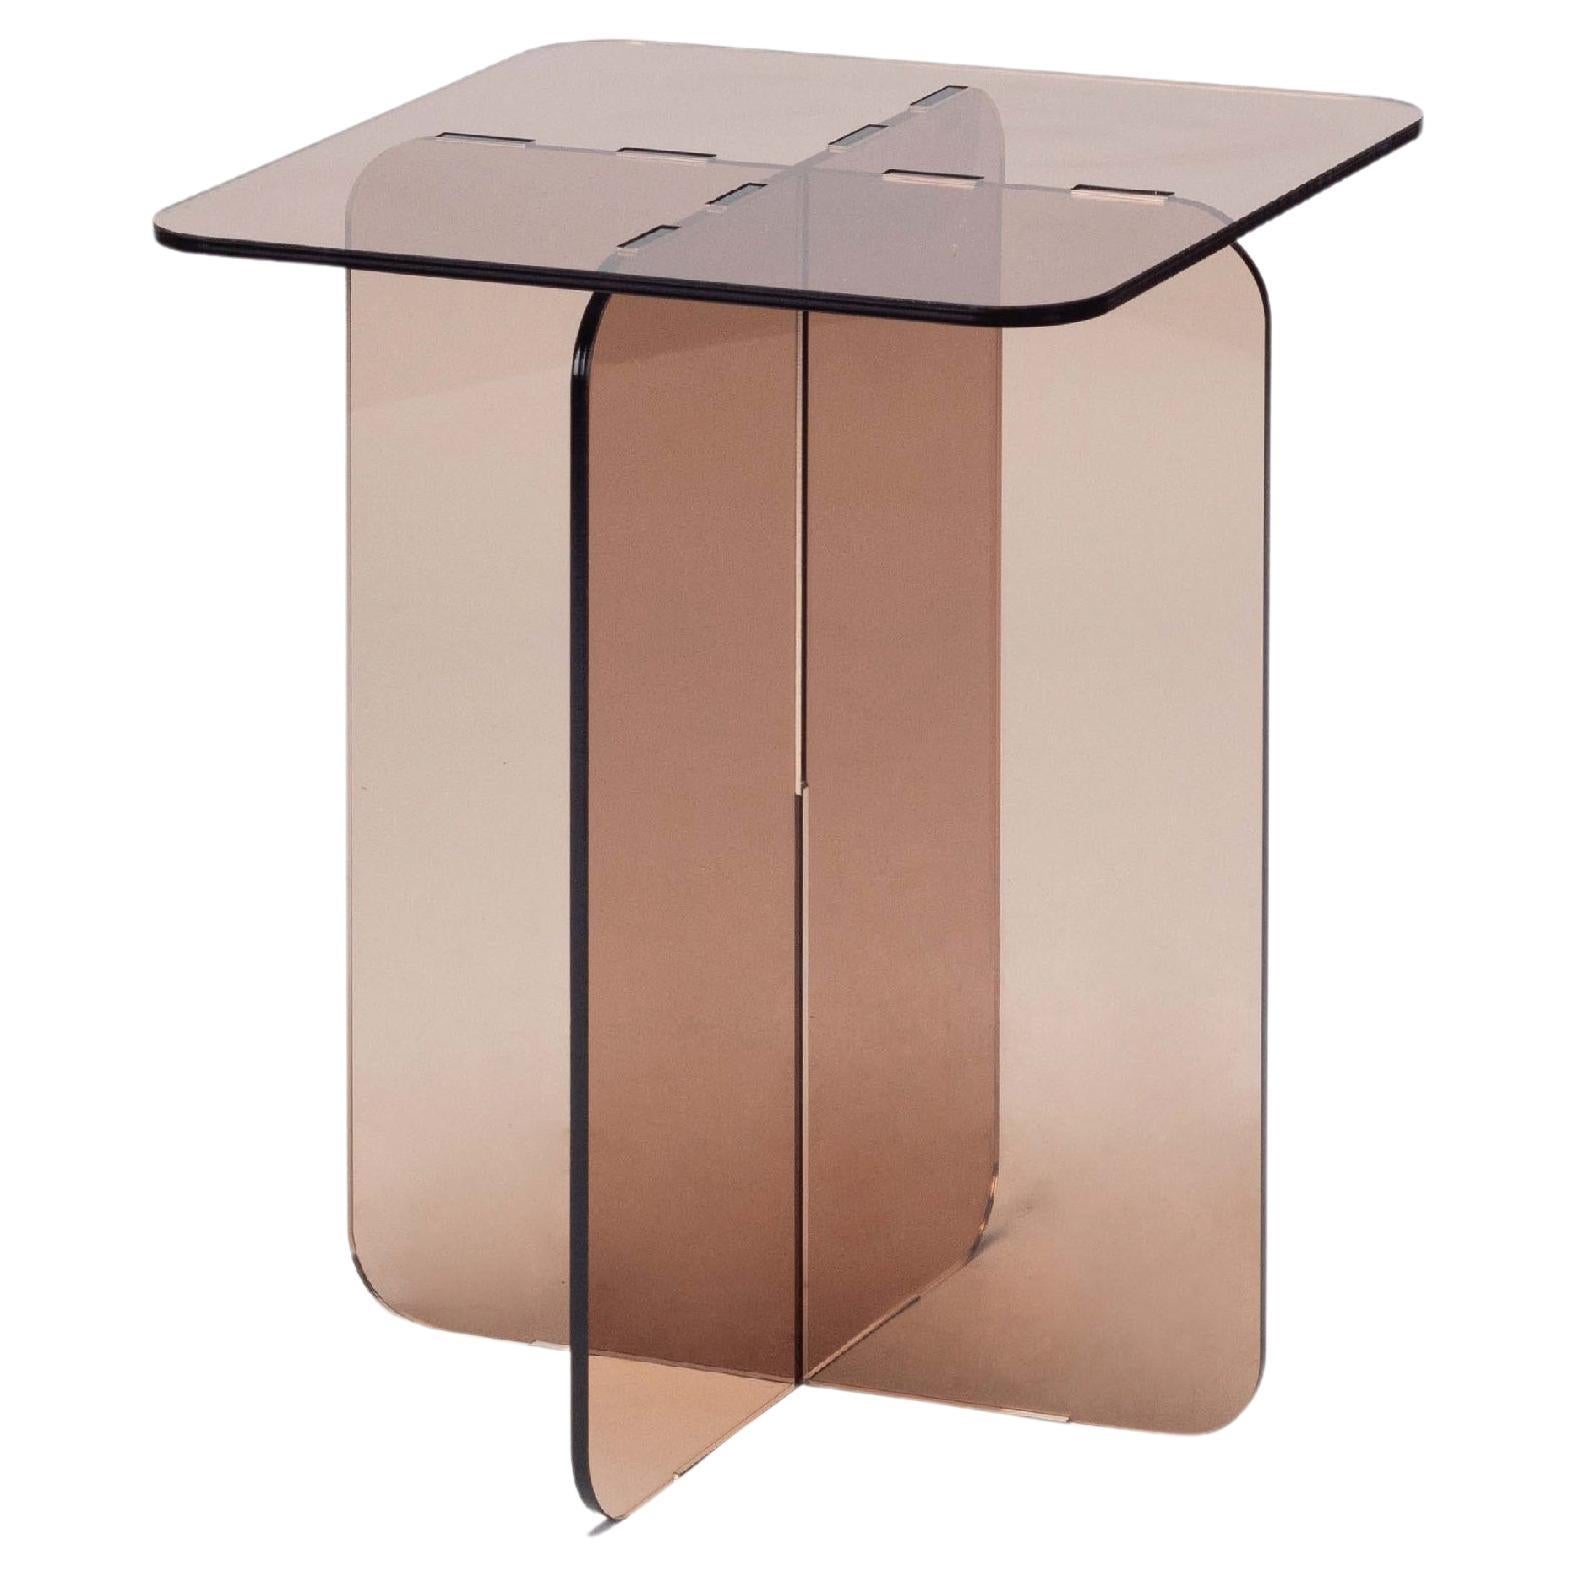 ROMA Table d'appoint Contemporary Acrylic by Ries (Square Top)